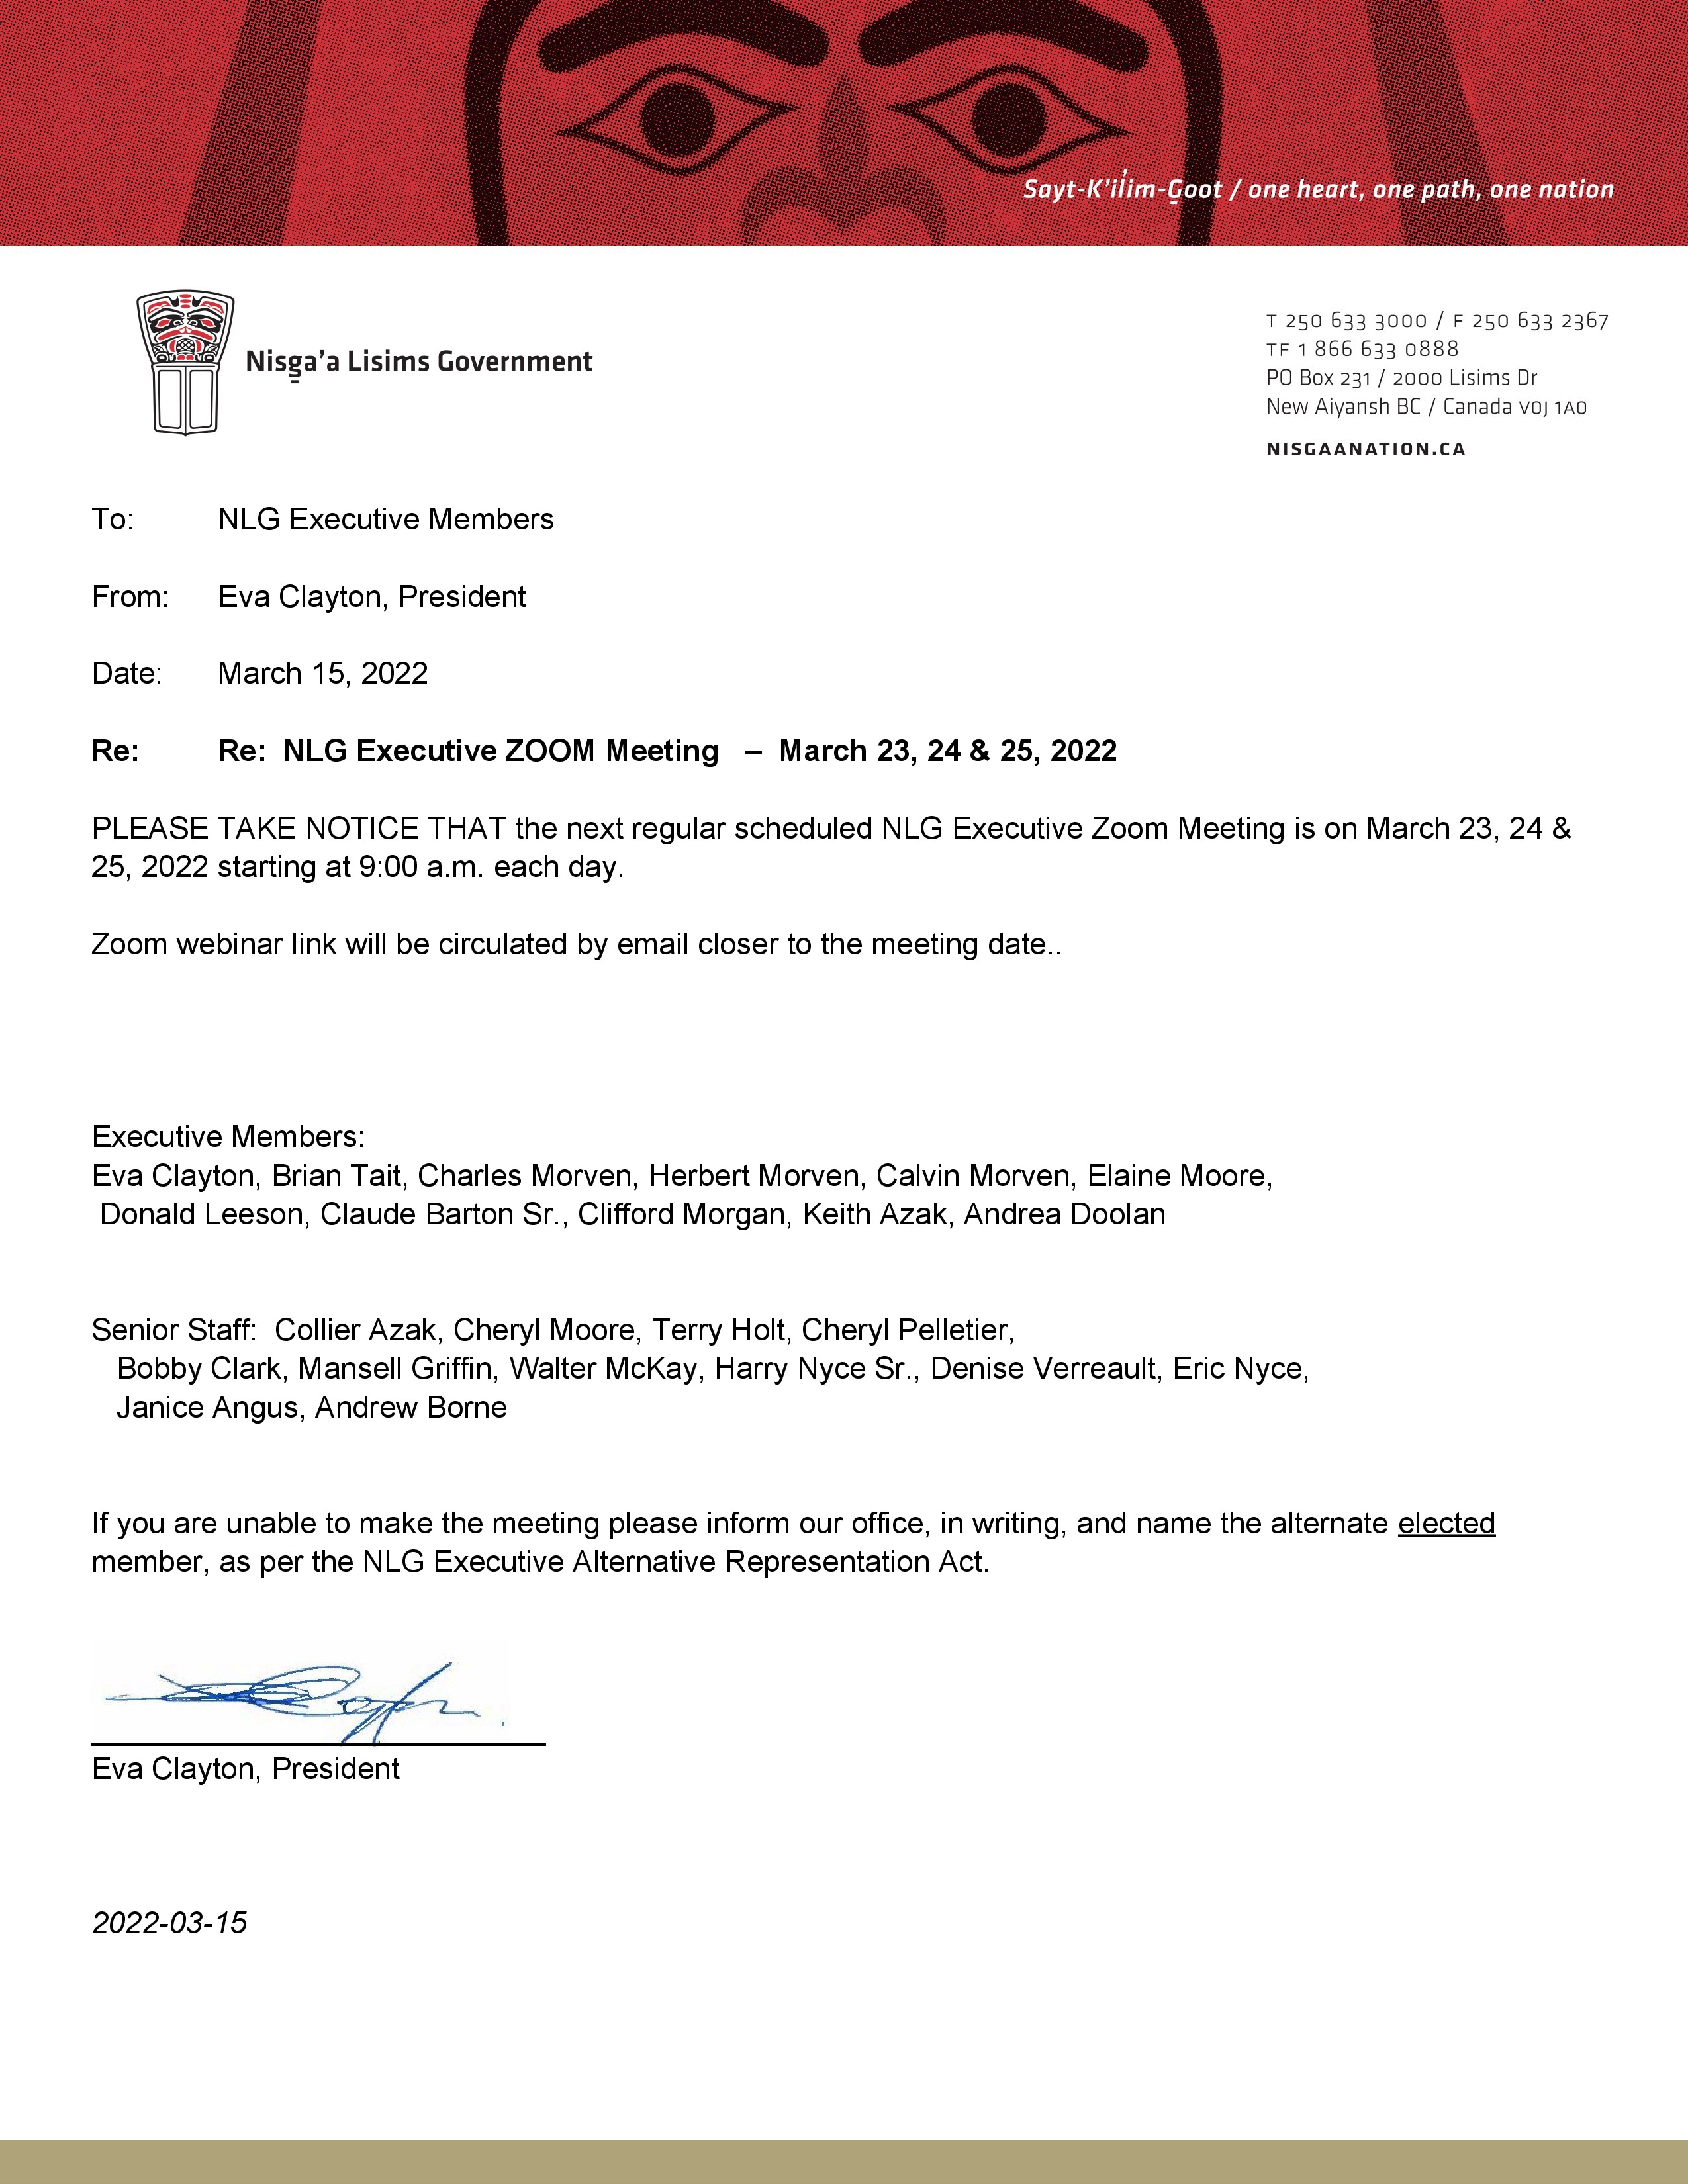 Mar 22. 2022. NLG Executive Zoom Meeting Notice - March 23 24 25 2022